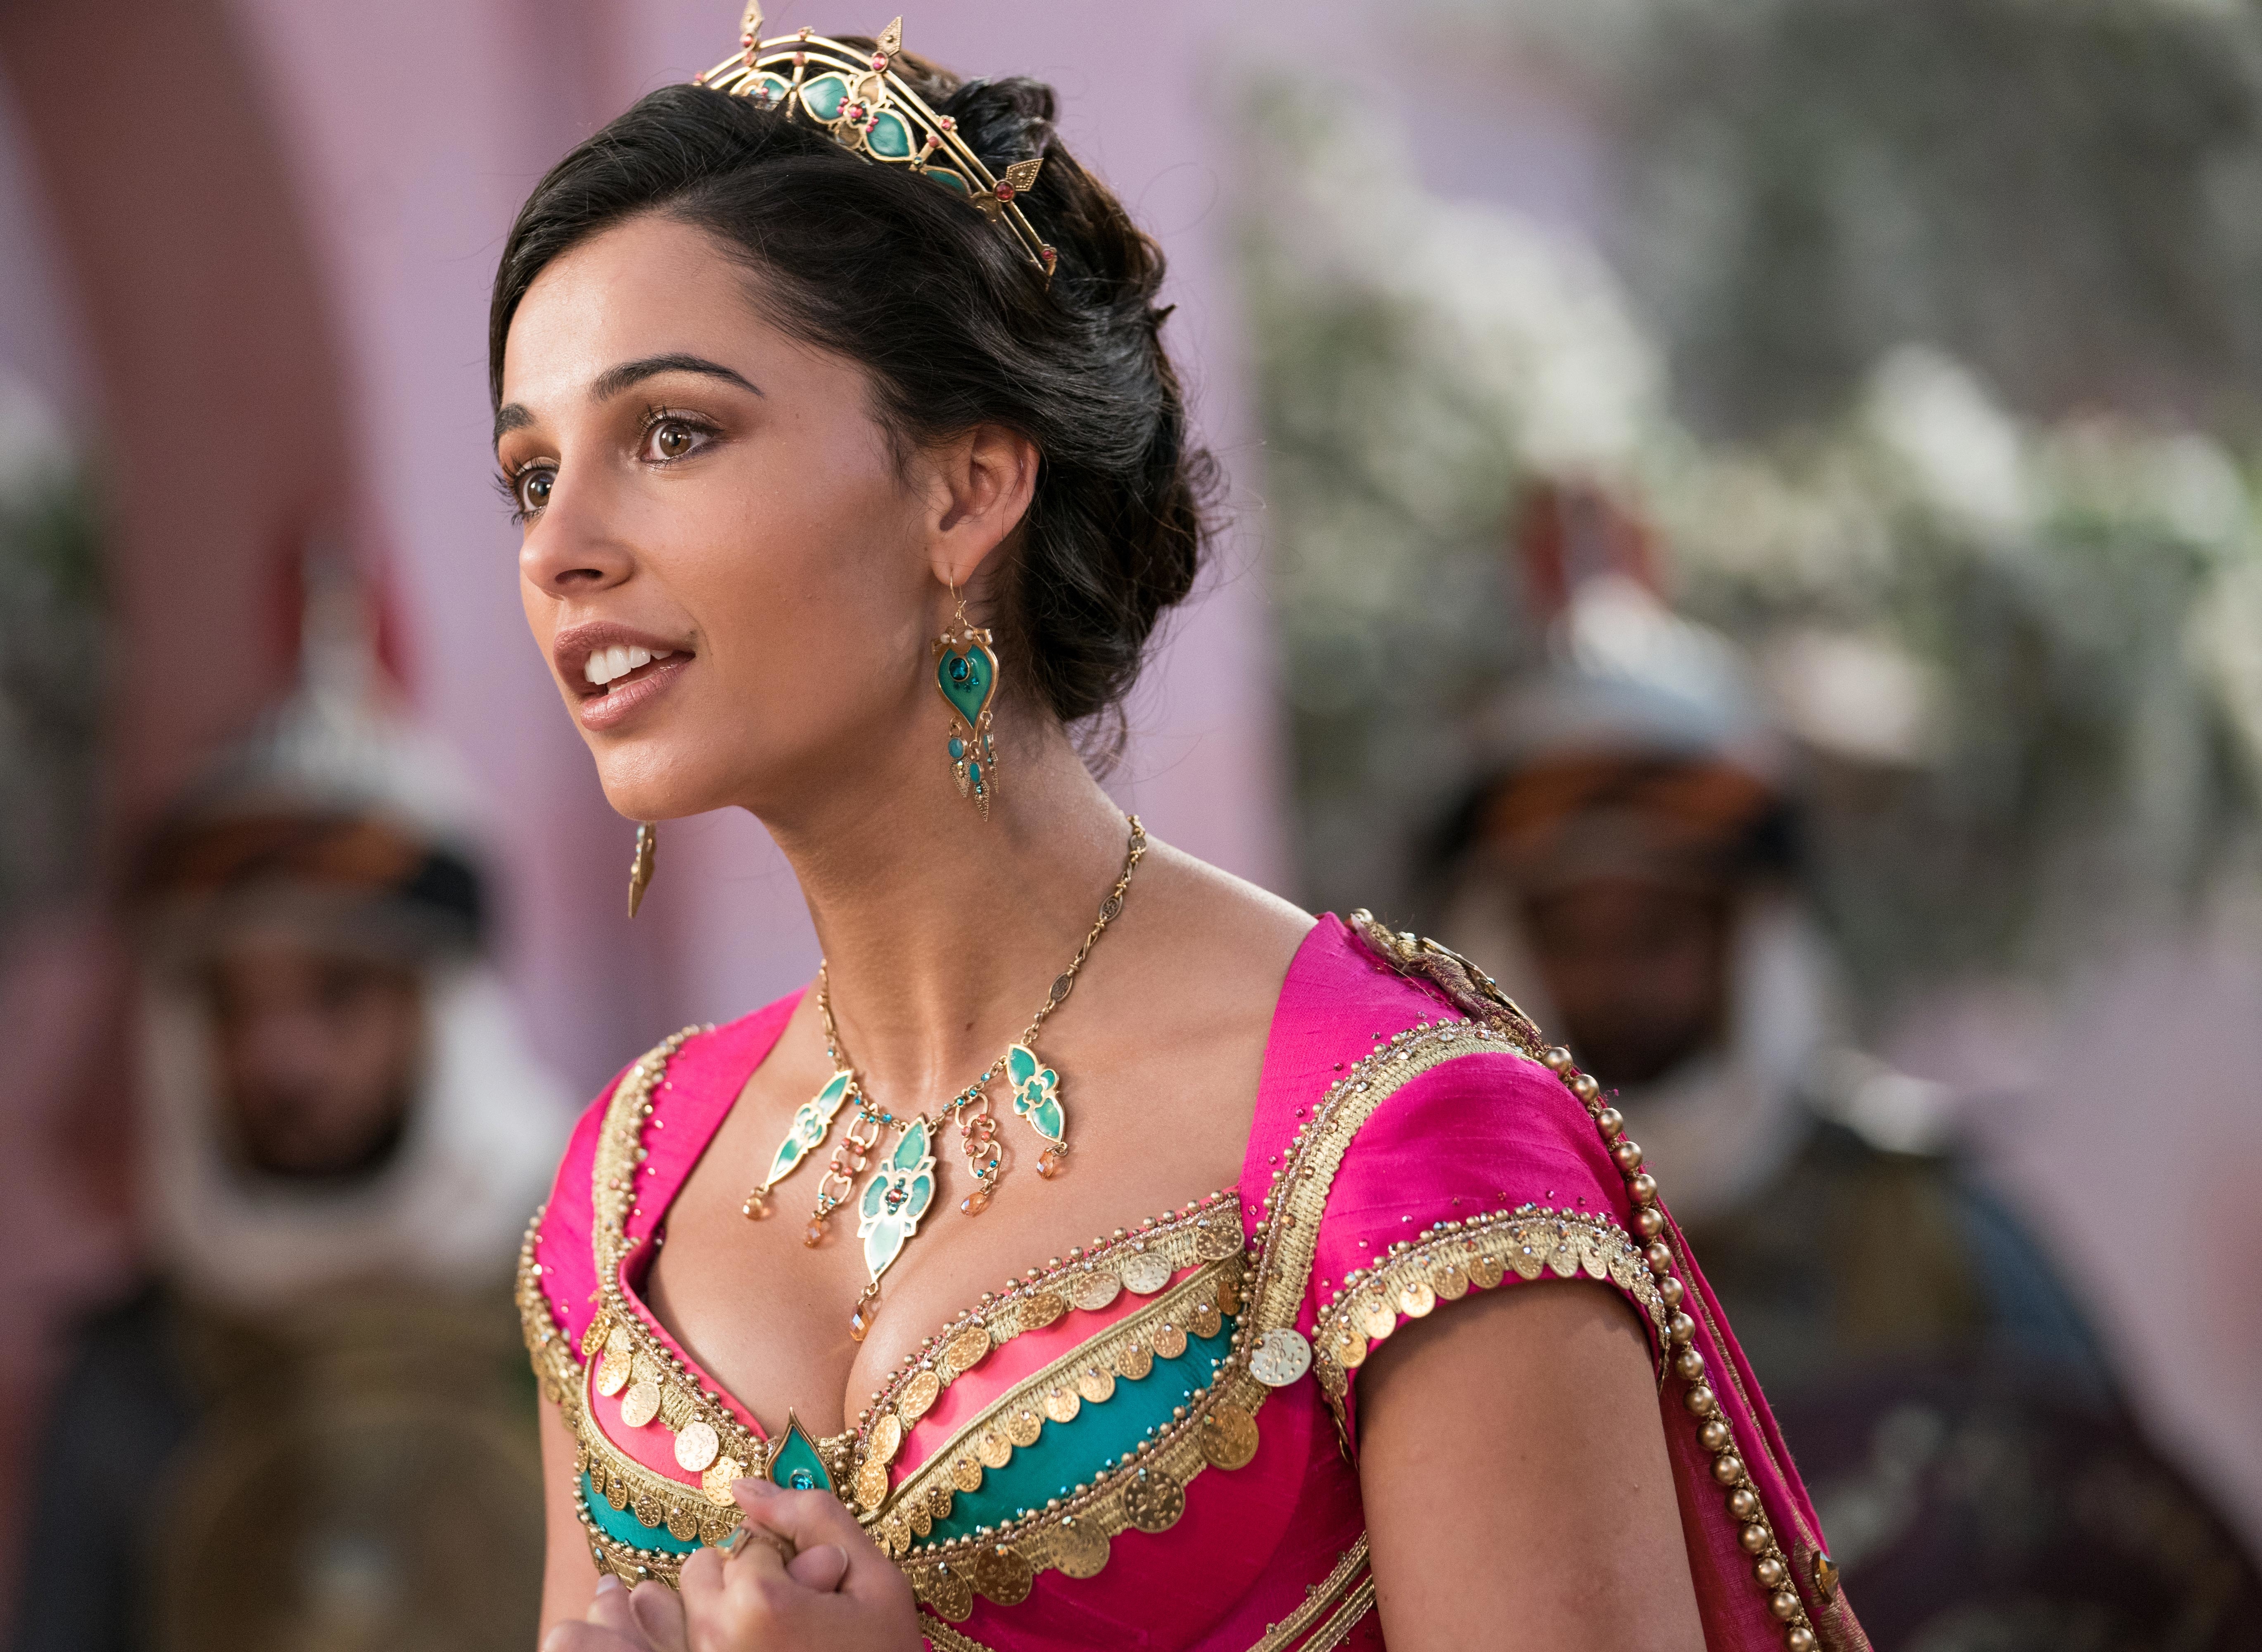 Naomi Scott As Jasmine In Aladdin Movie Wallpaper Hd Movies 4k Wallpapers Images Photos And 